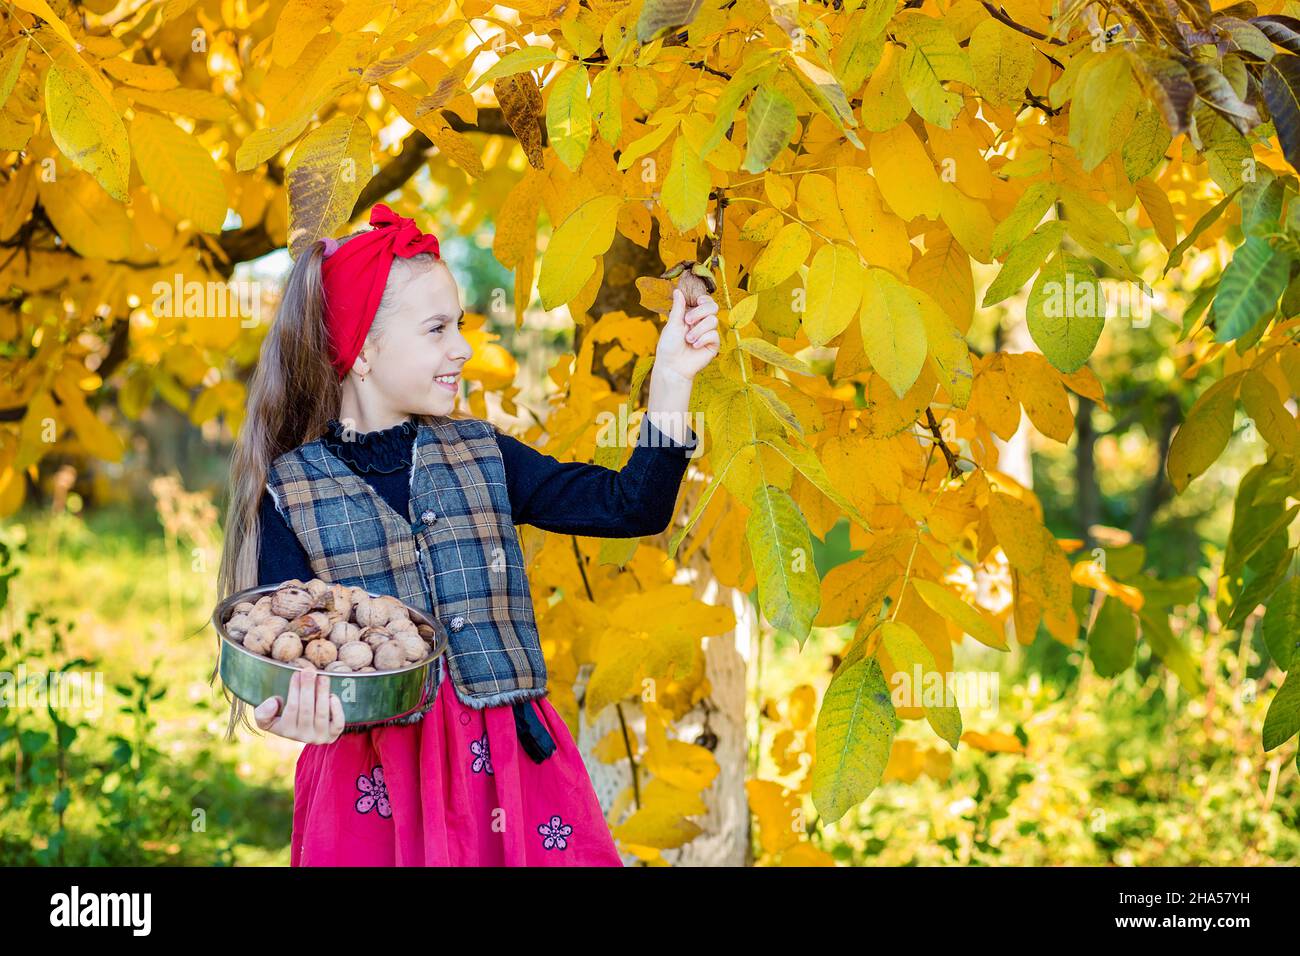 Cute girl with walnuts from the walnut harvest in the garden. Colorful and blurred walnut, located in the background. Stock Photo